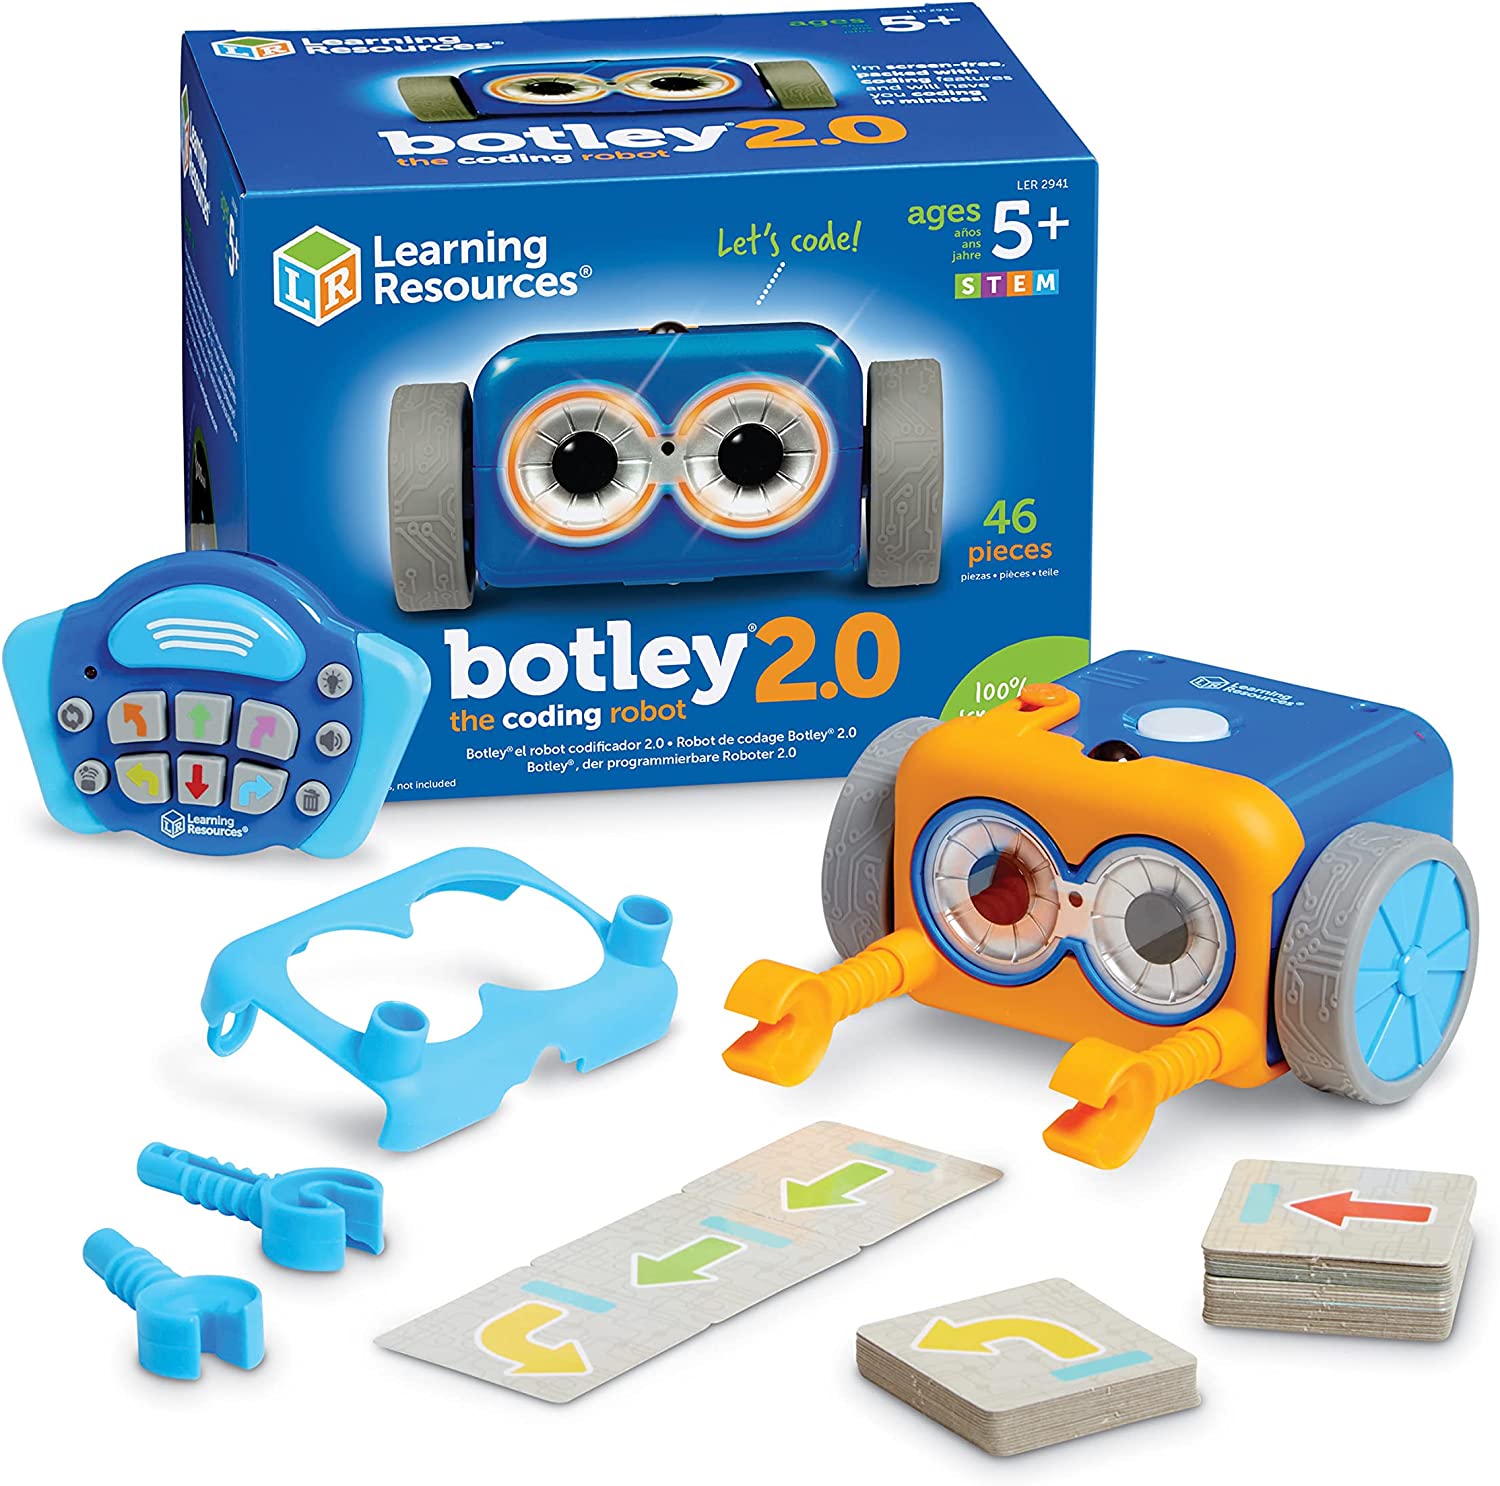 Botley 2.0 Coding Robot Review: Screen-Free Coding - MacSources